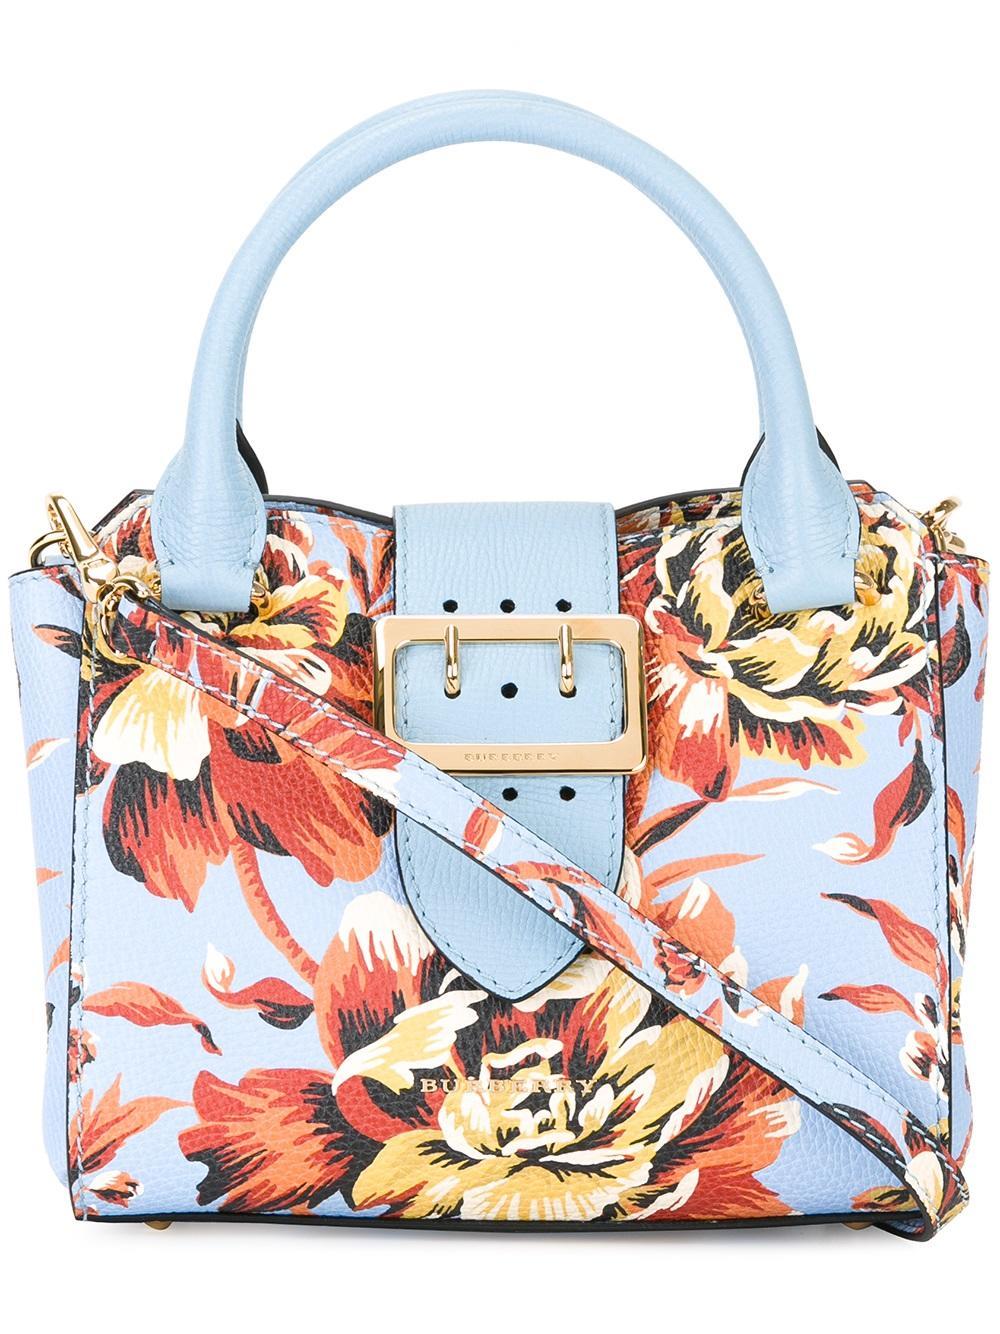 Lyst - Burberry Floral-print Tote Bag in Blue